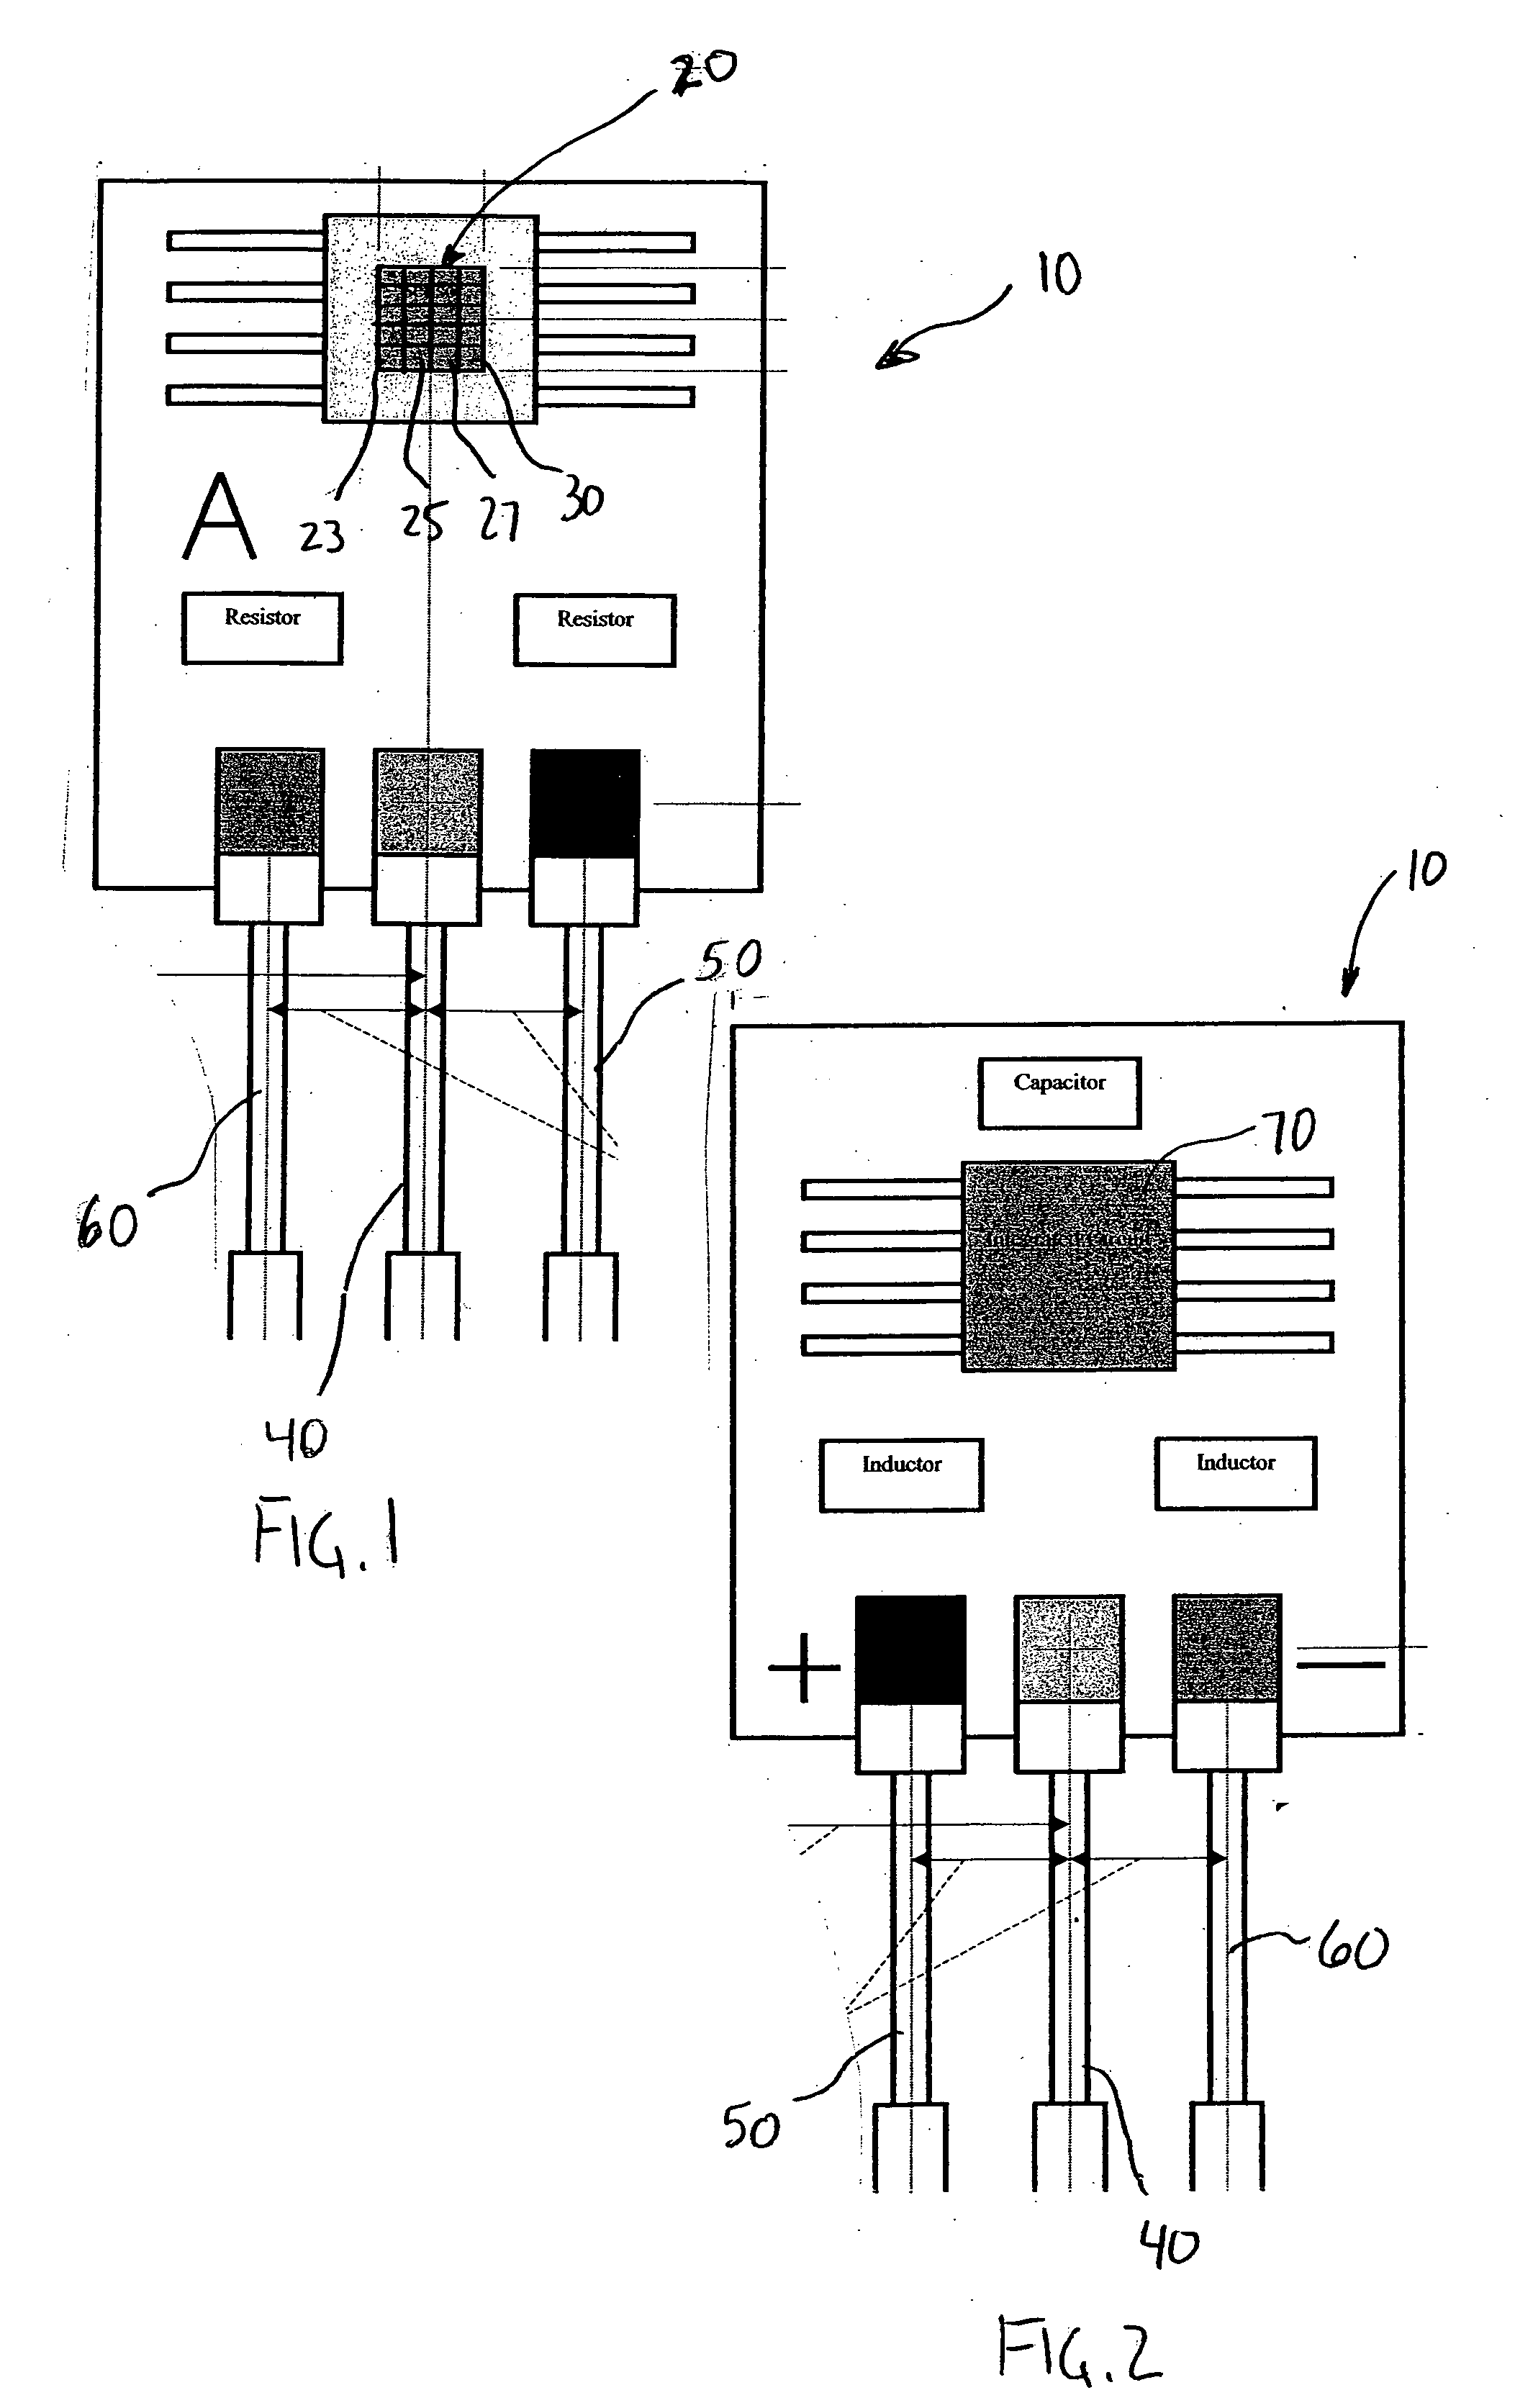 Method and apparatus for determining a color and brightness of an LED in a printed circuit board